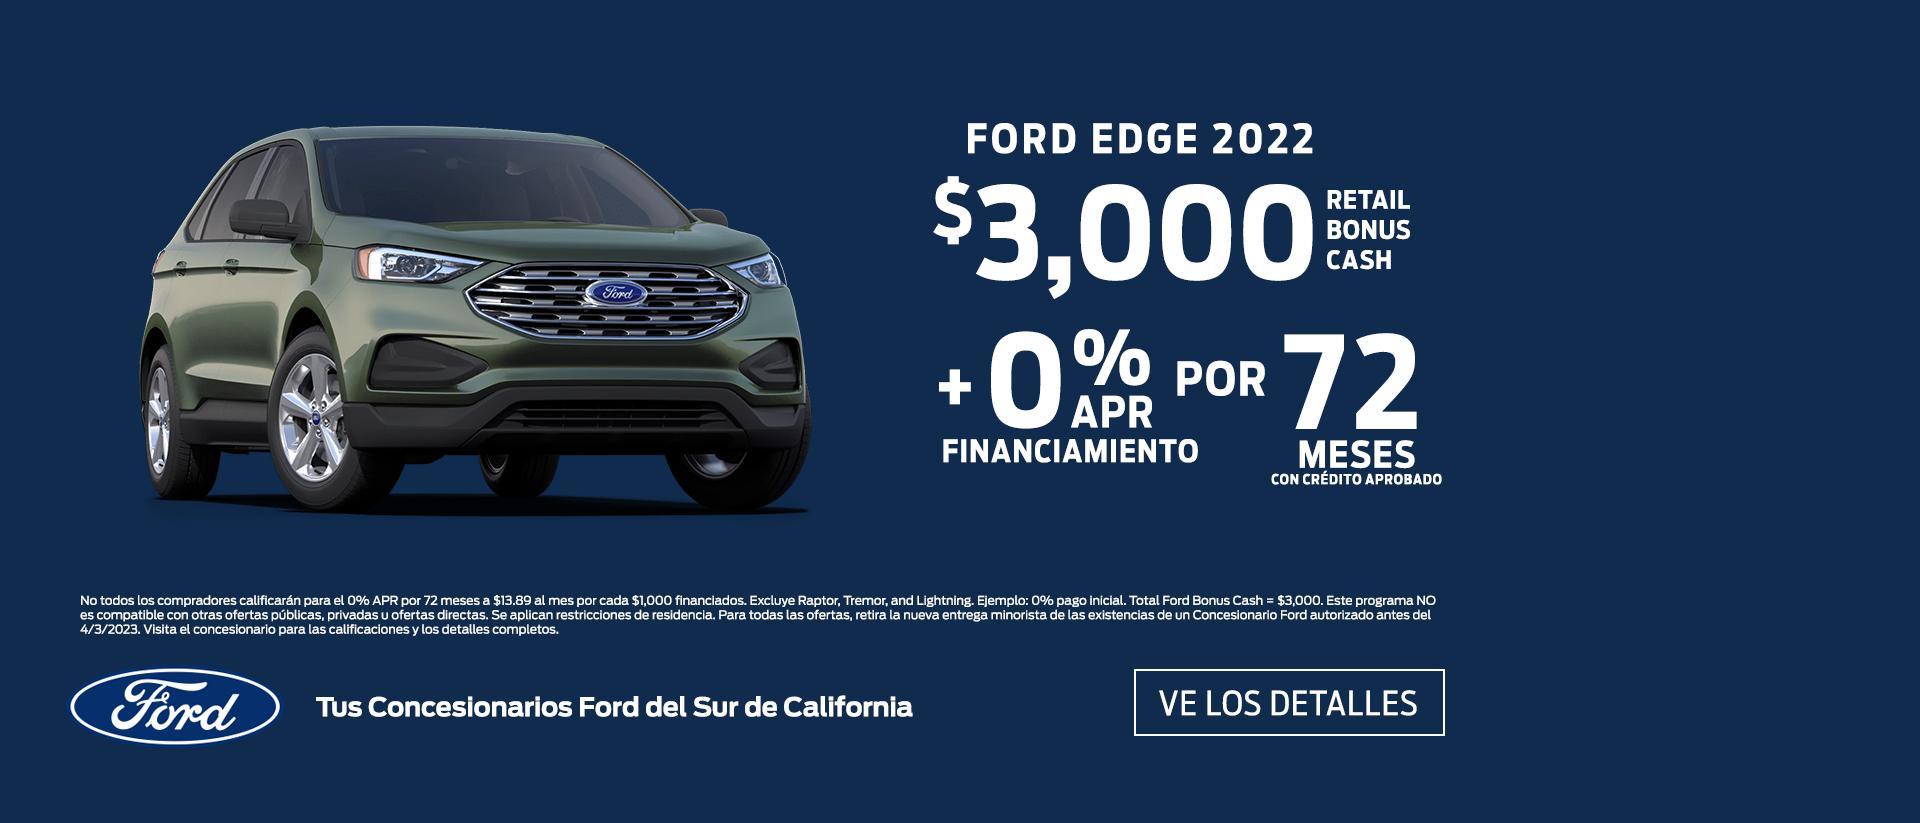 2022 Ford Edge | Southern California Ford Dealers